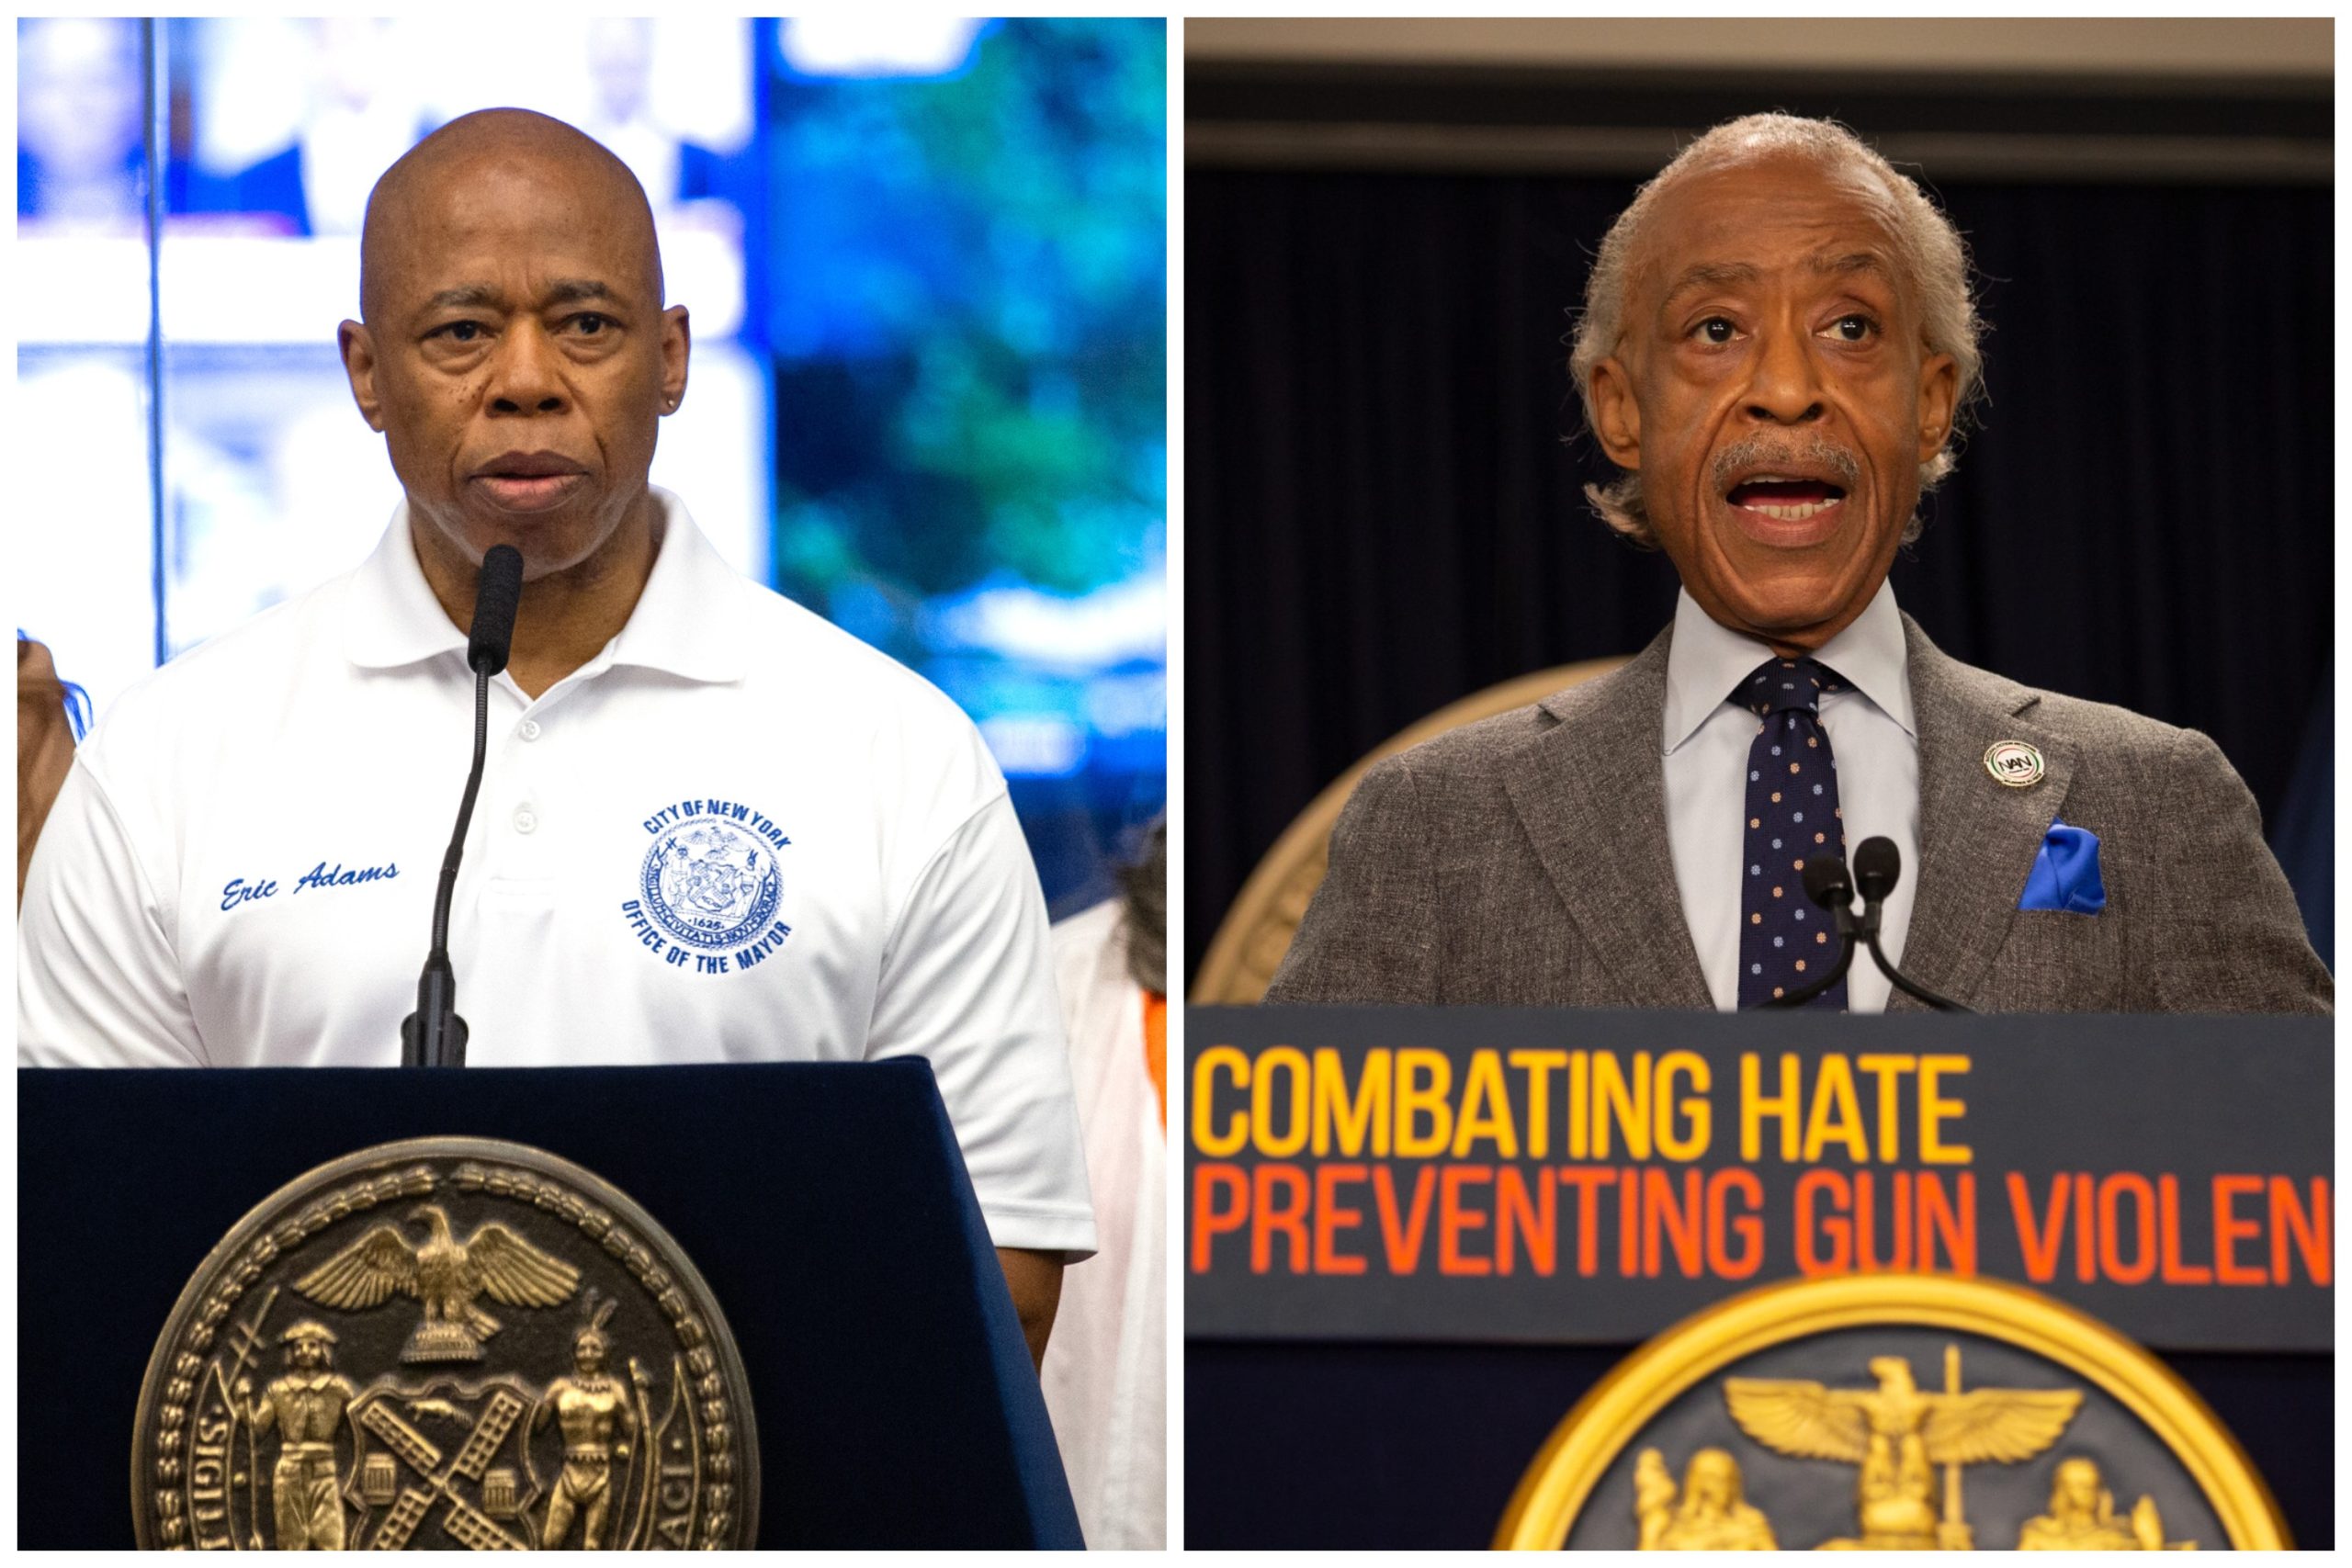 Mayor Eric Adams and the Reverend Al Sharpton are seeing speaking at podiums in a diptych image.